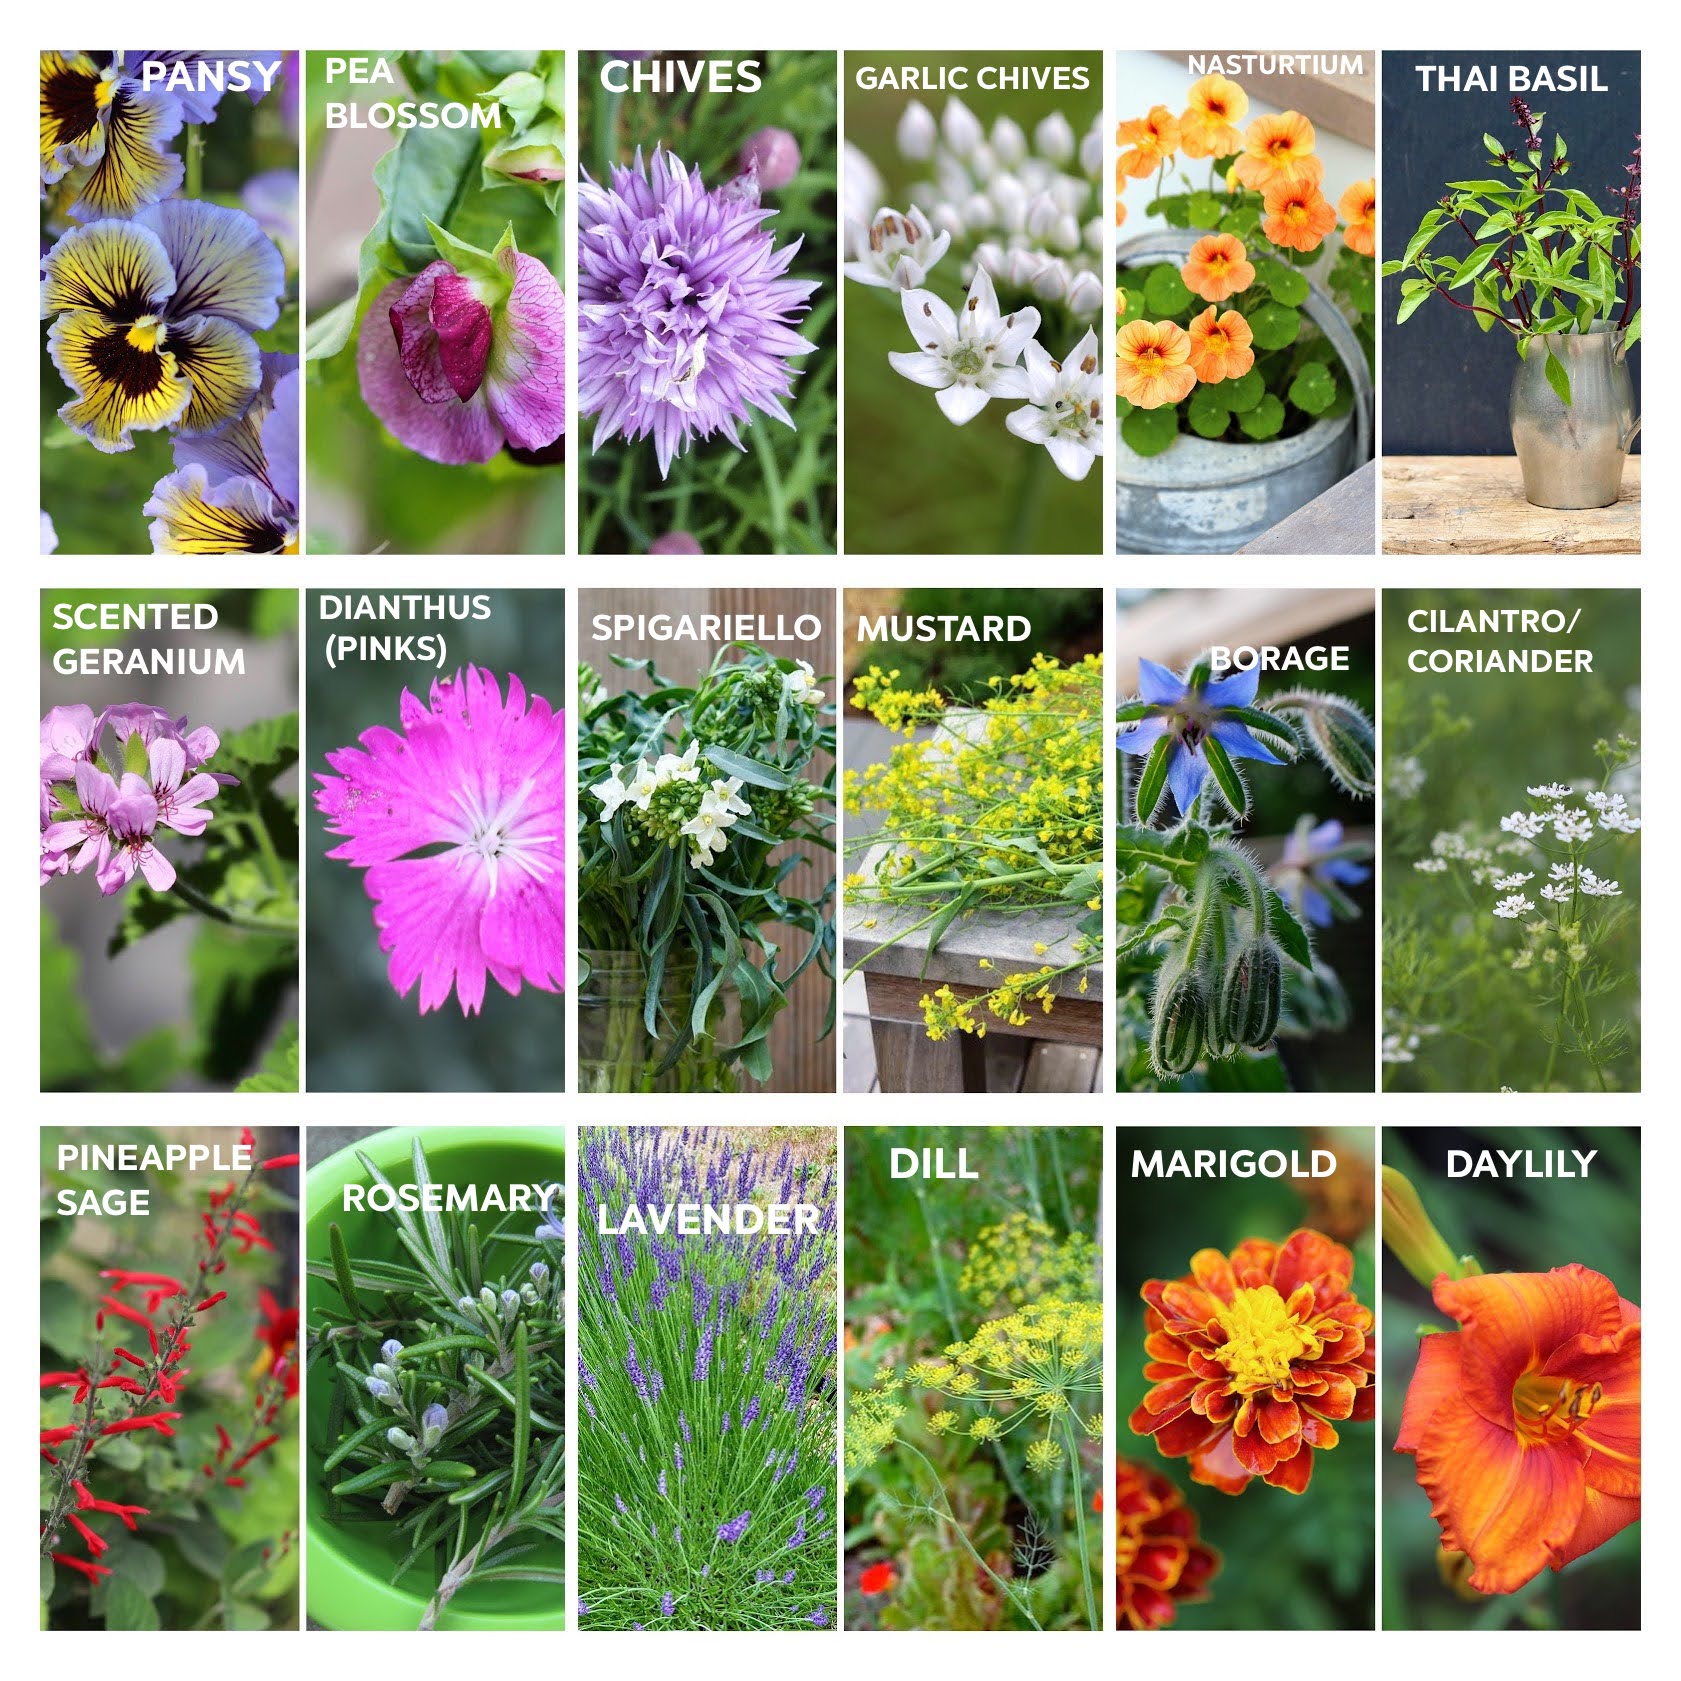 Summer herbs and edible flowers